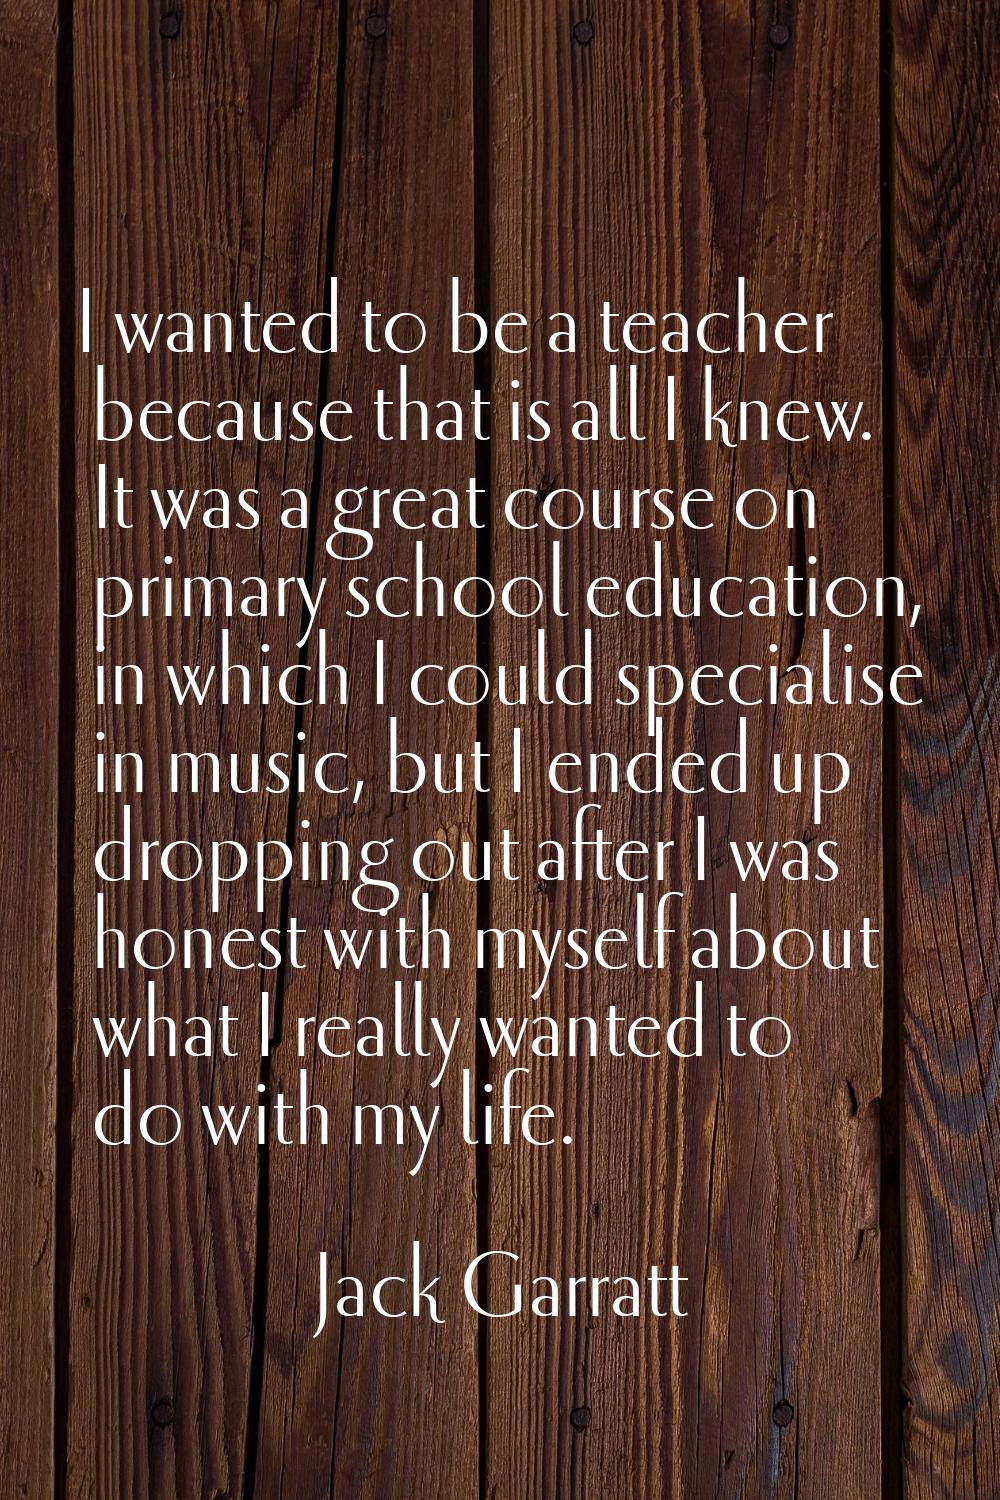 I wanted to be a teacher because that is all I knew. It was a great course on primary school educat